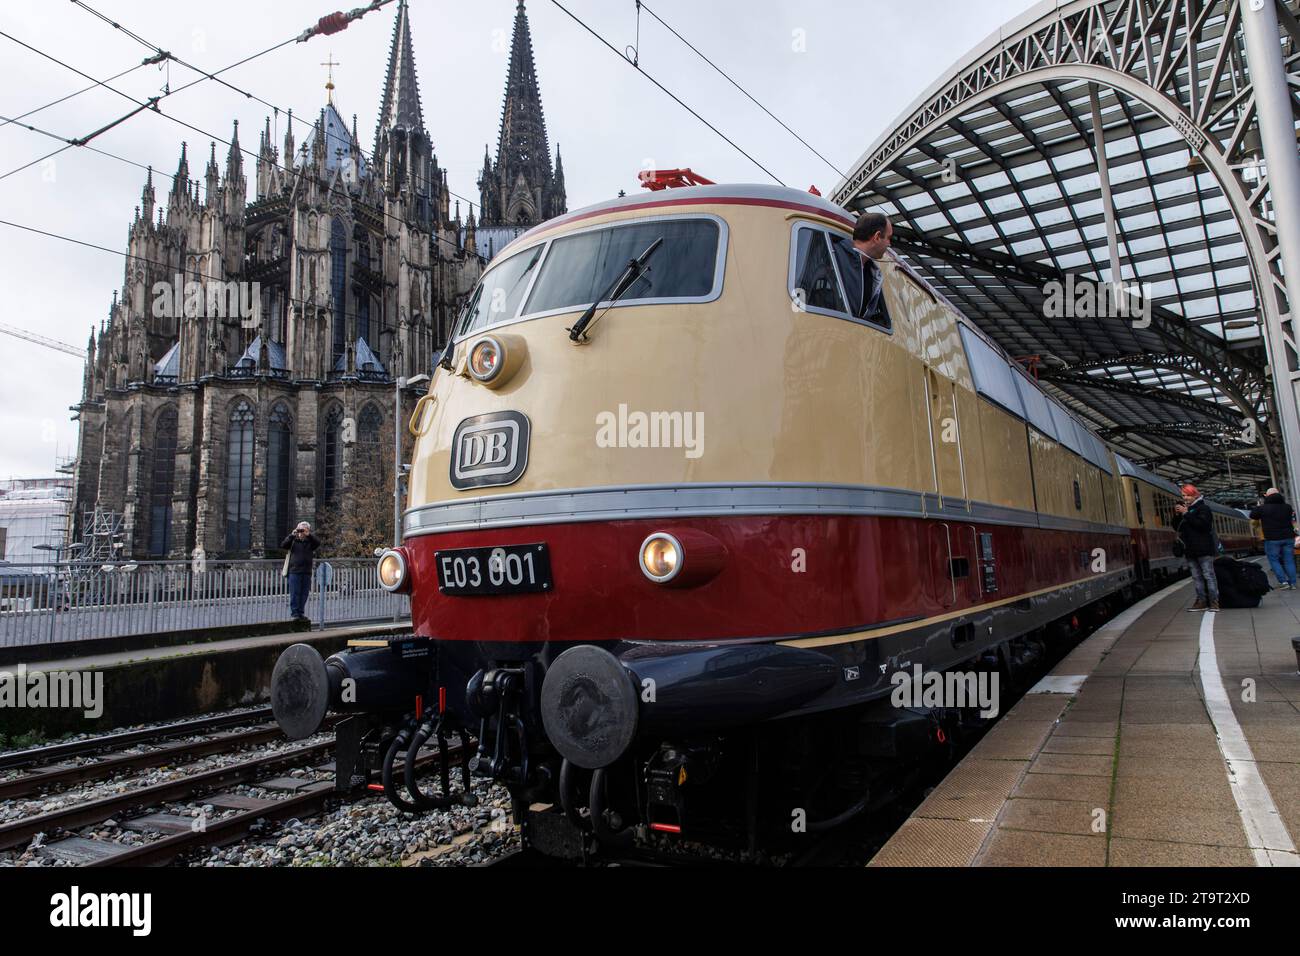 locomotive E03 001 of the historical Rheingold train leaving the main station, Cologne cathedral, Cologne, Germany. Lokomotive E03 001 des historische Stock Photo